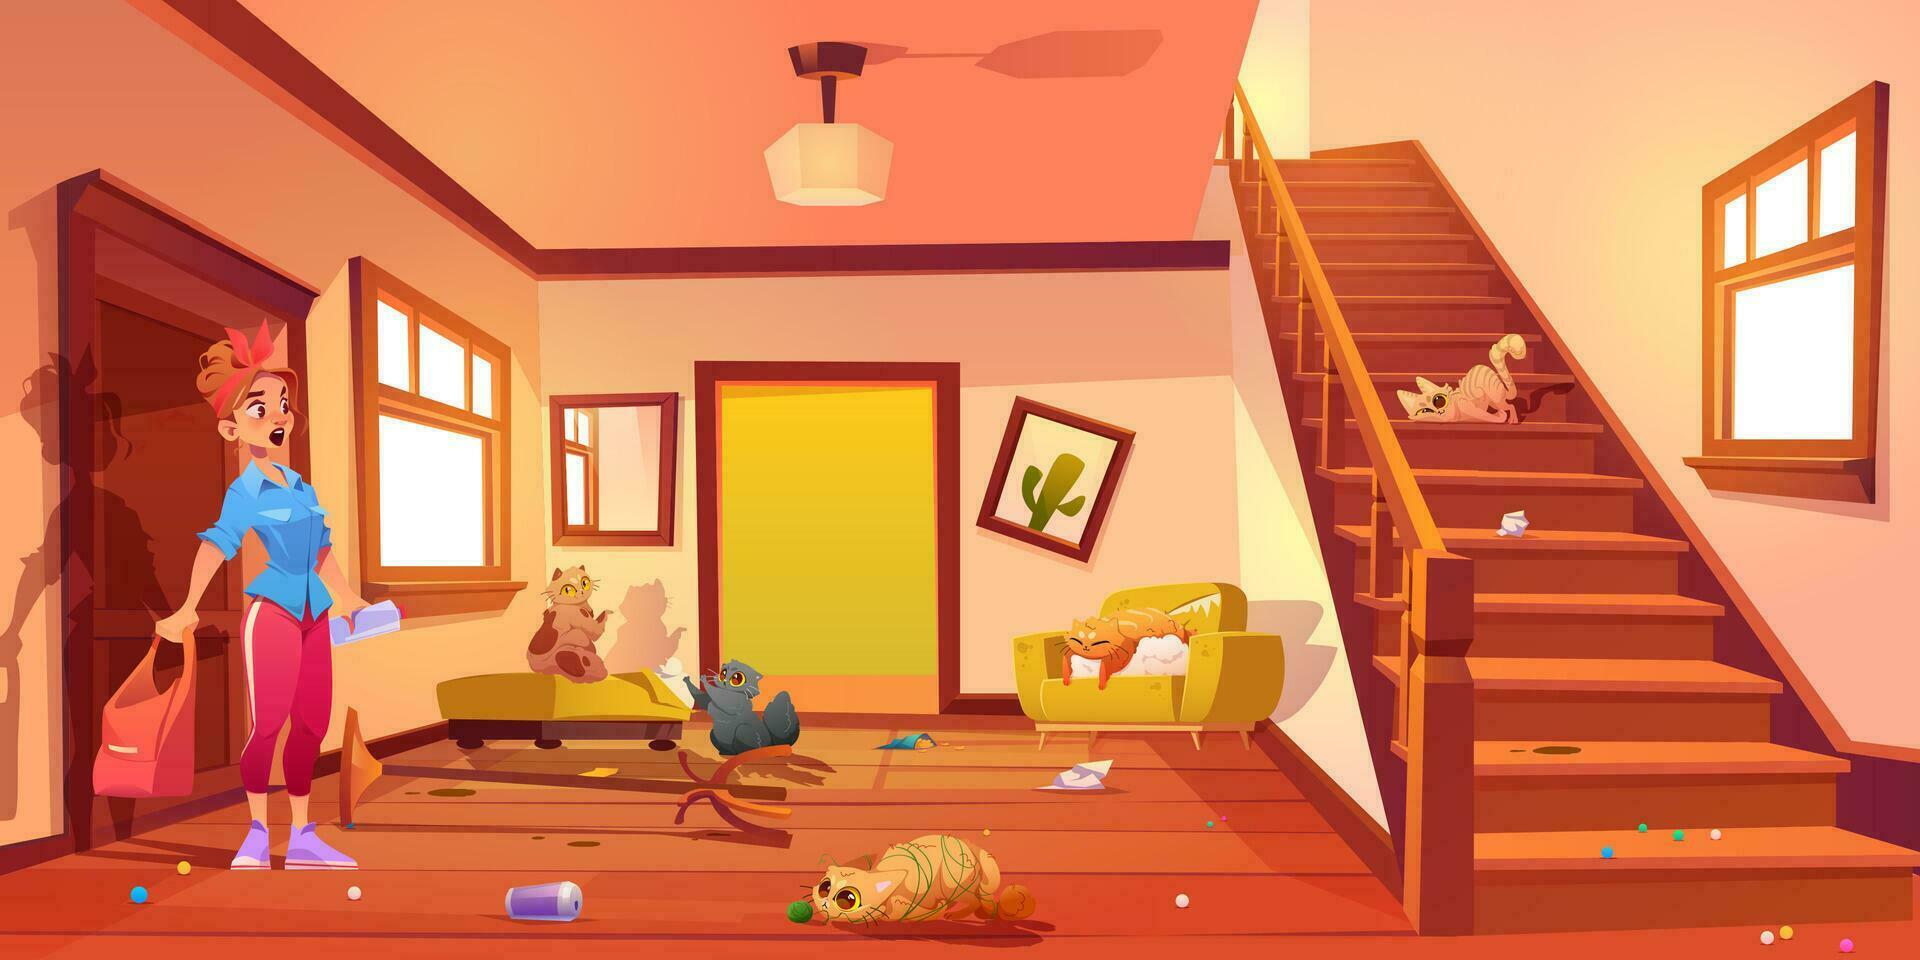 Woman cat owner shocked in messy hall interior vector